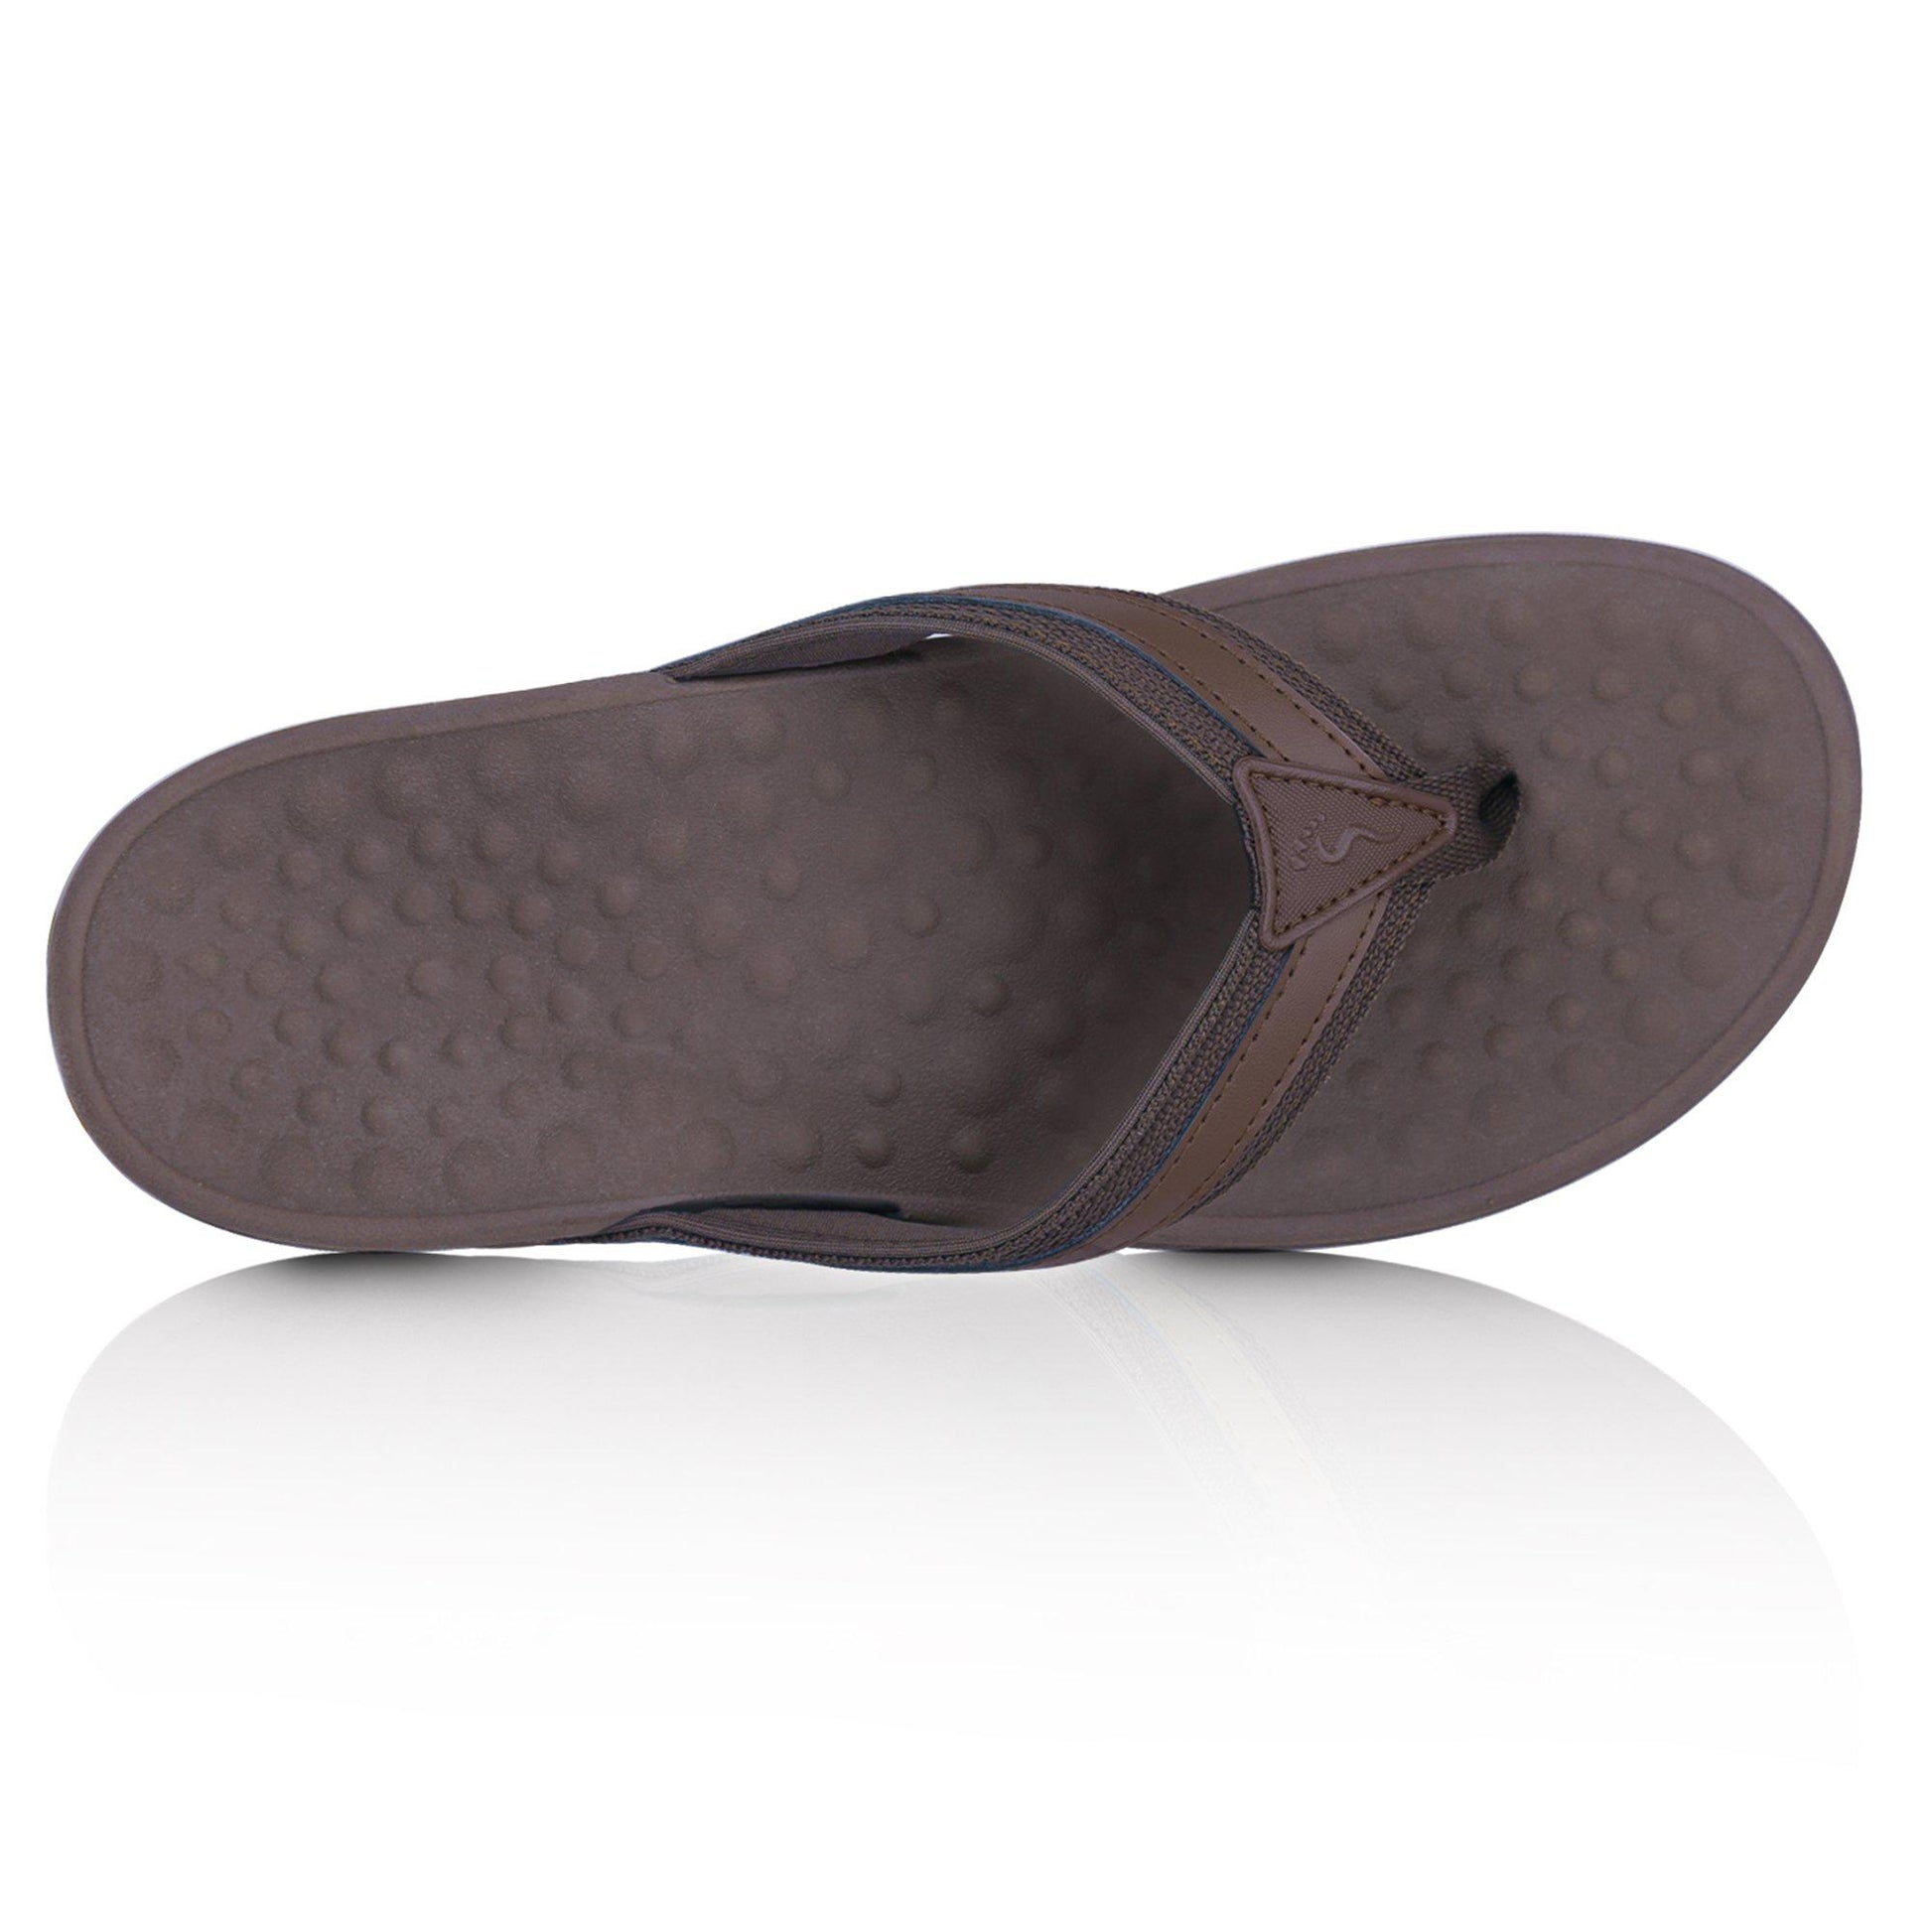 Footminders BALTRA Orthotic Sandals (Pair) -Cocoa Brown